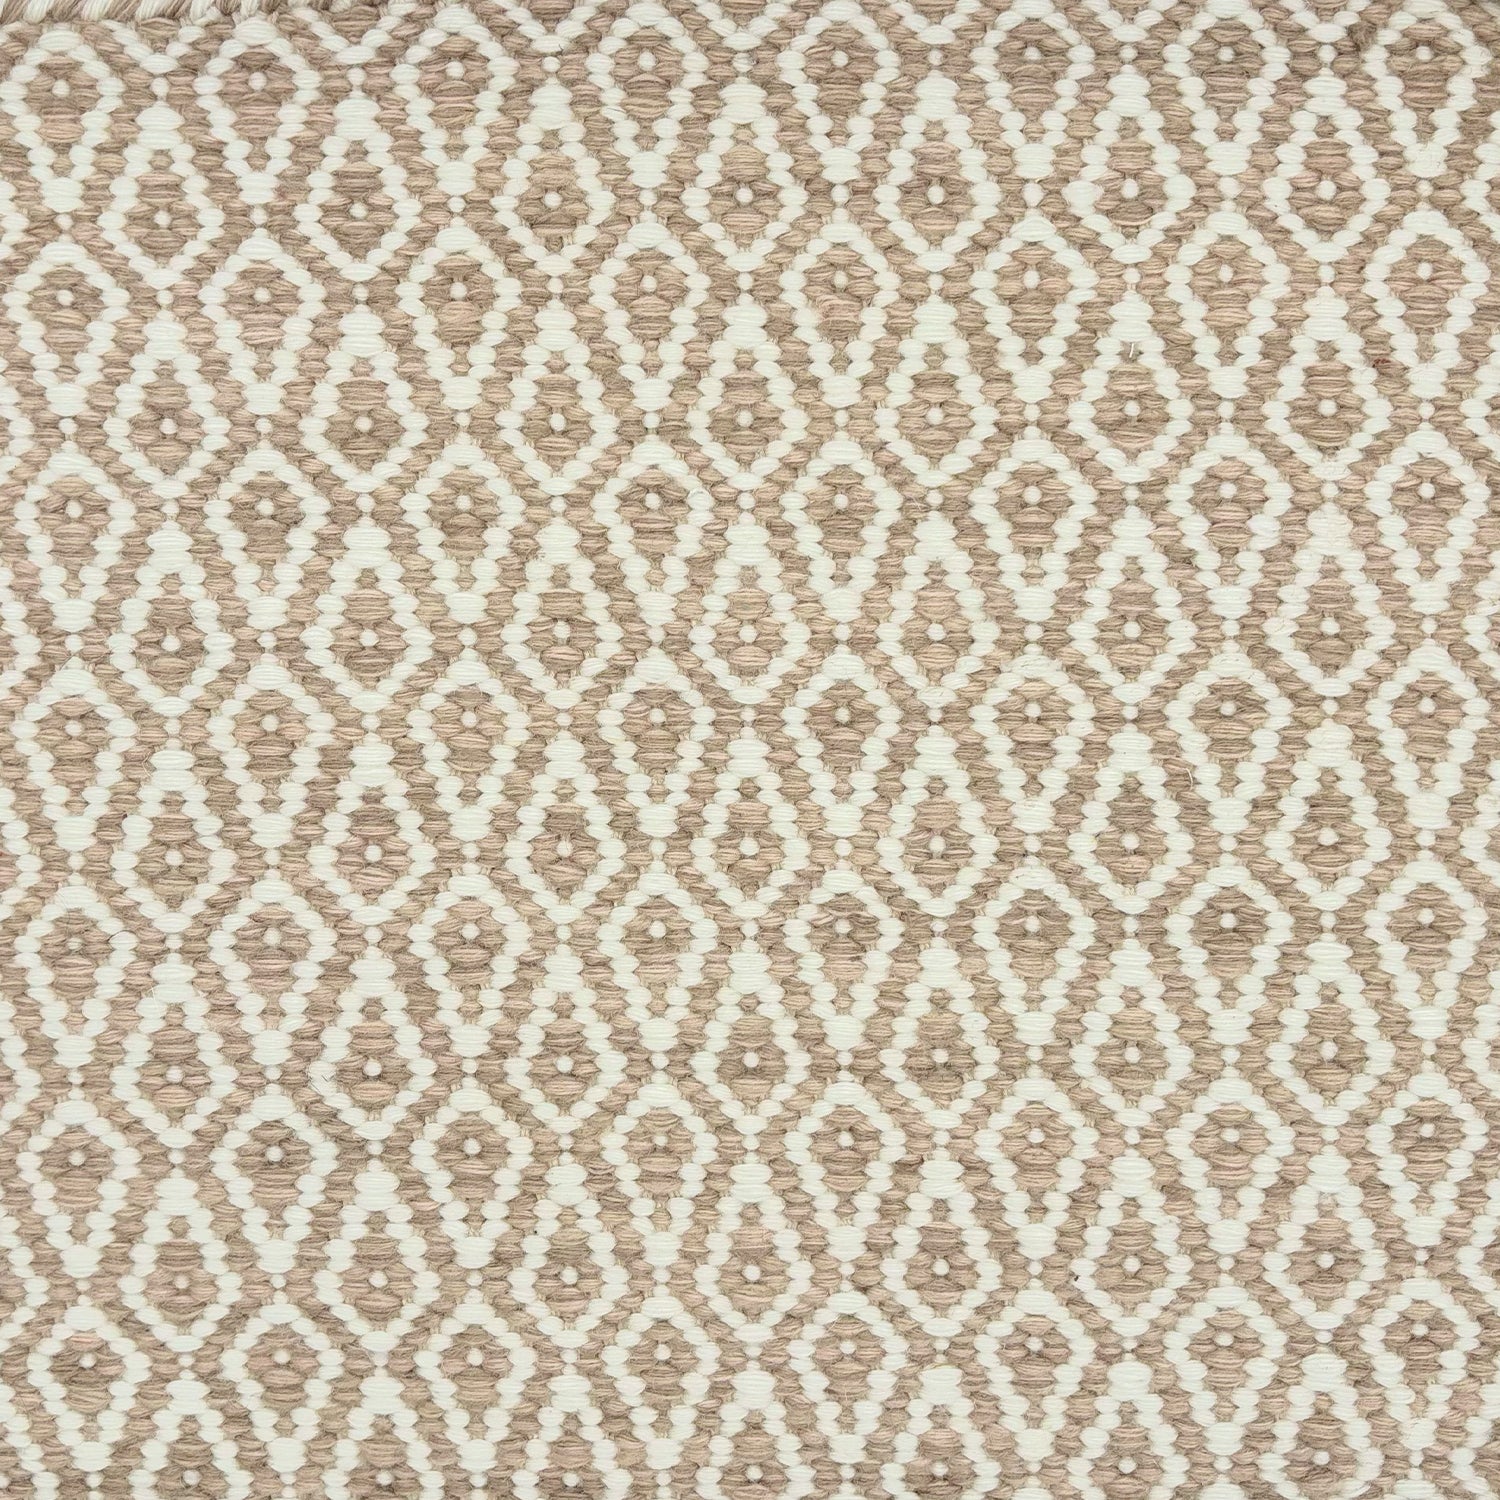 Detail of a handowven rug in an diamond like pattern in white and soft pink.